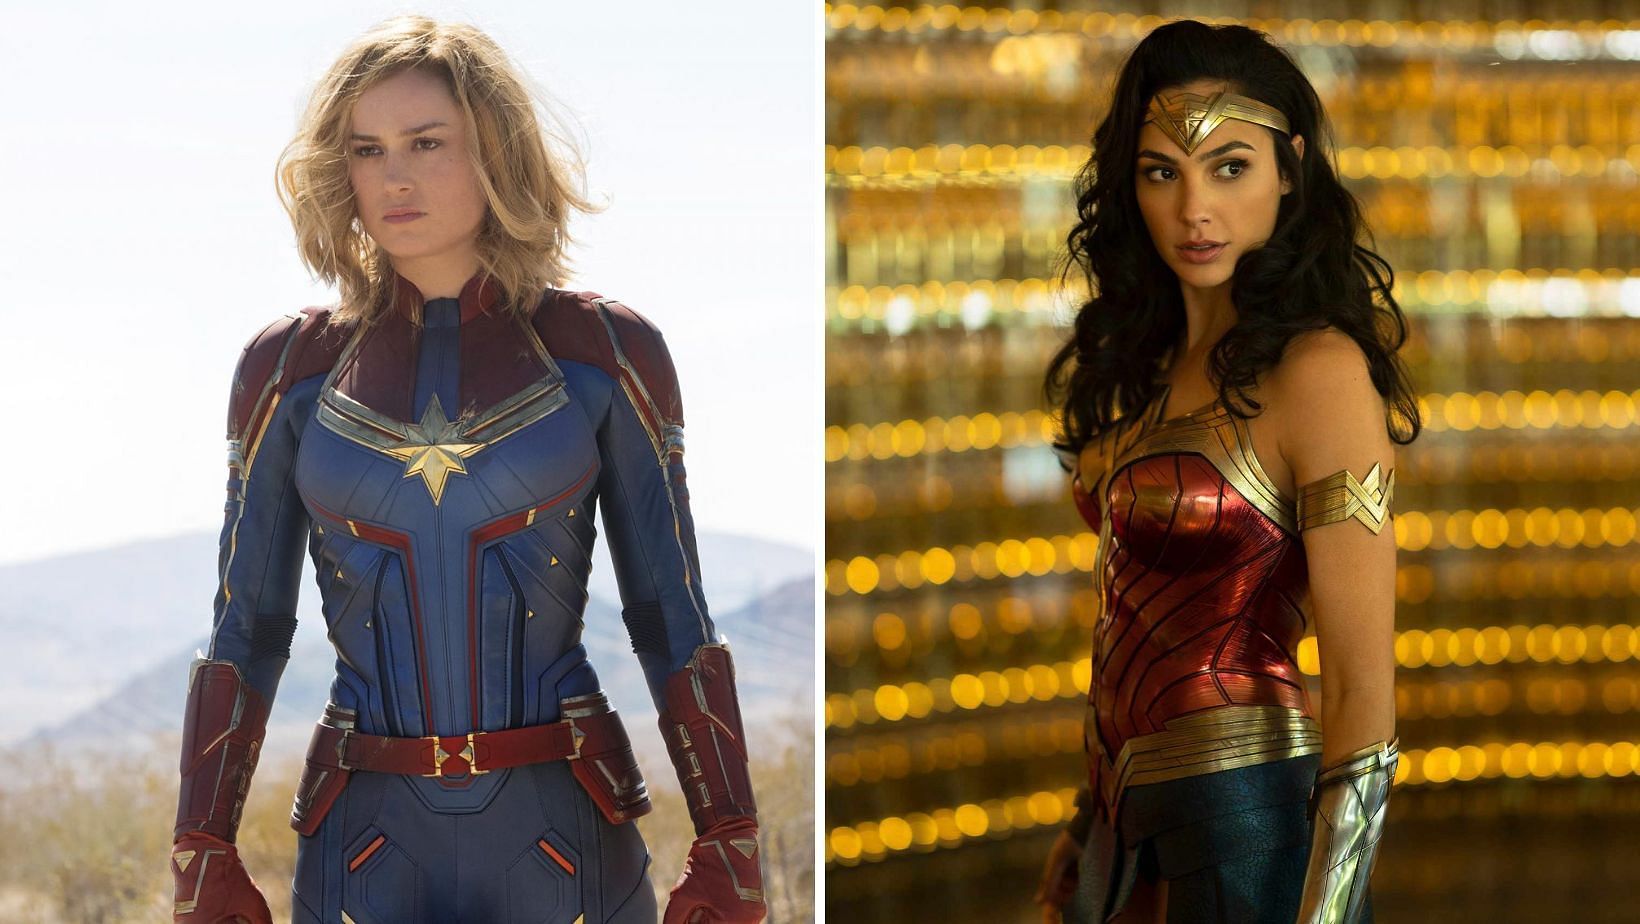 Two of the most powerful female superheroes face off in an epic battle for the ages. Who will emerge victorious in this clash of titans? (Image via Sportskeeda)